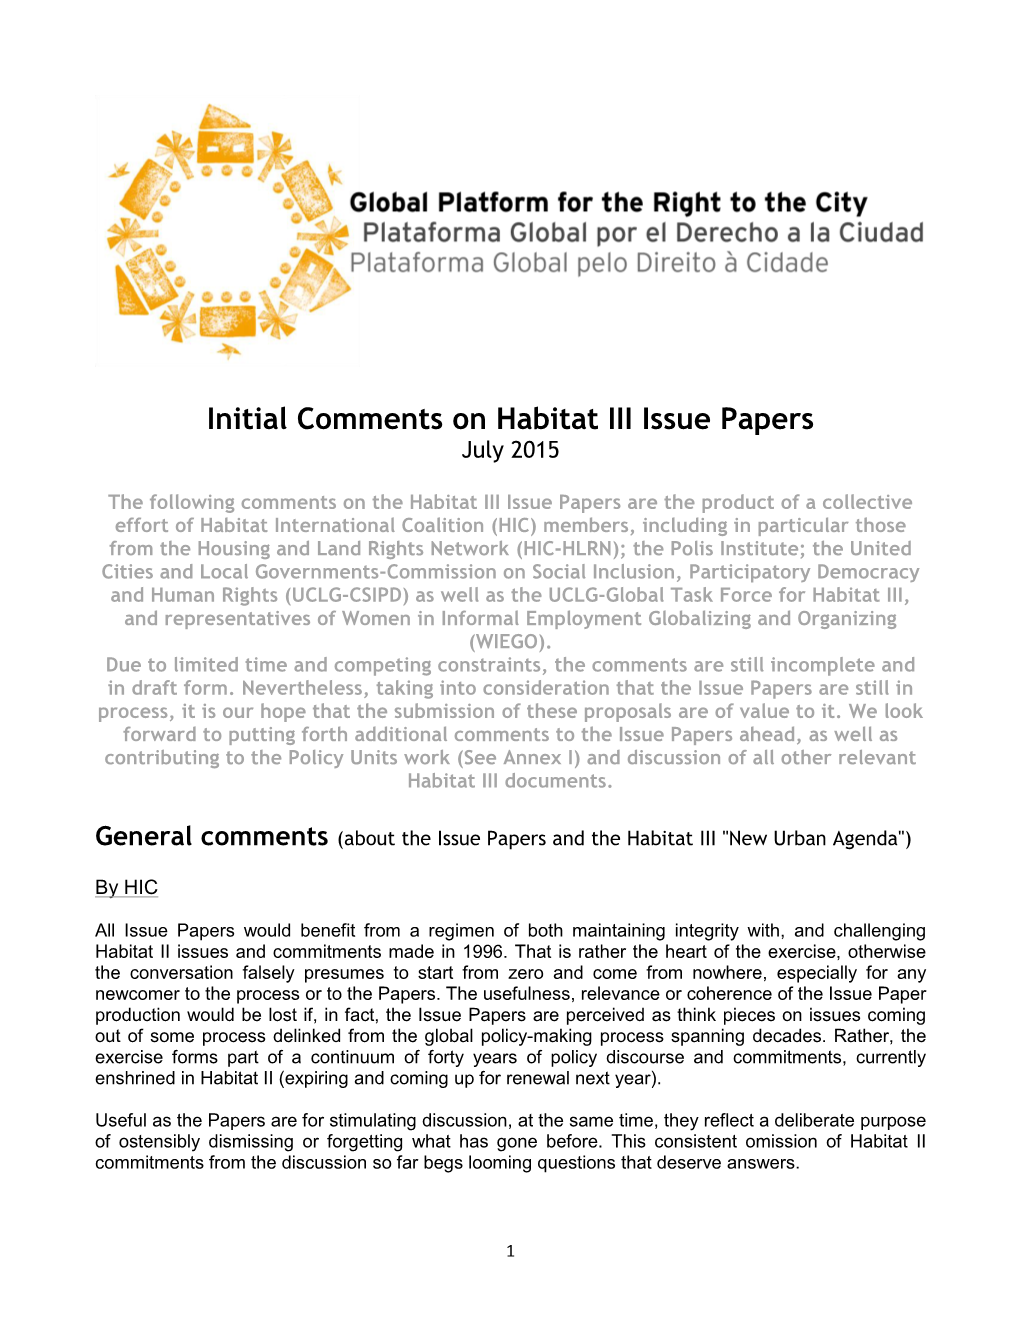 Initial Comments on Habitat III Issue Papers July 2015